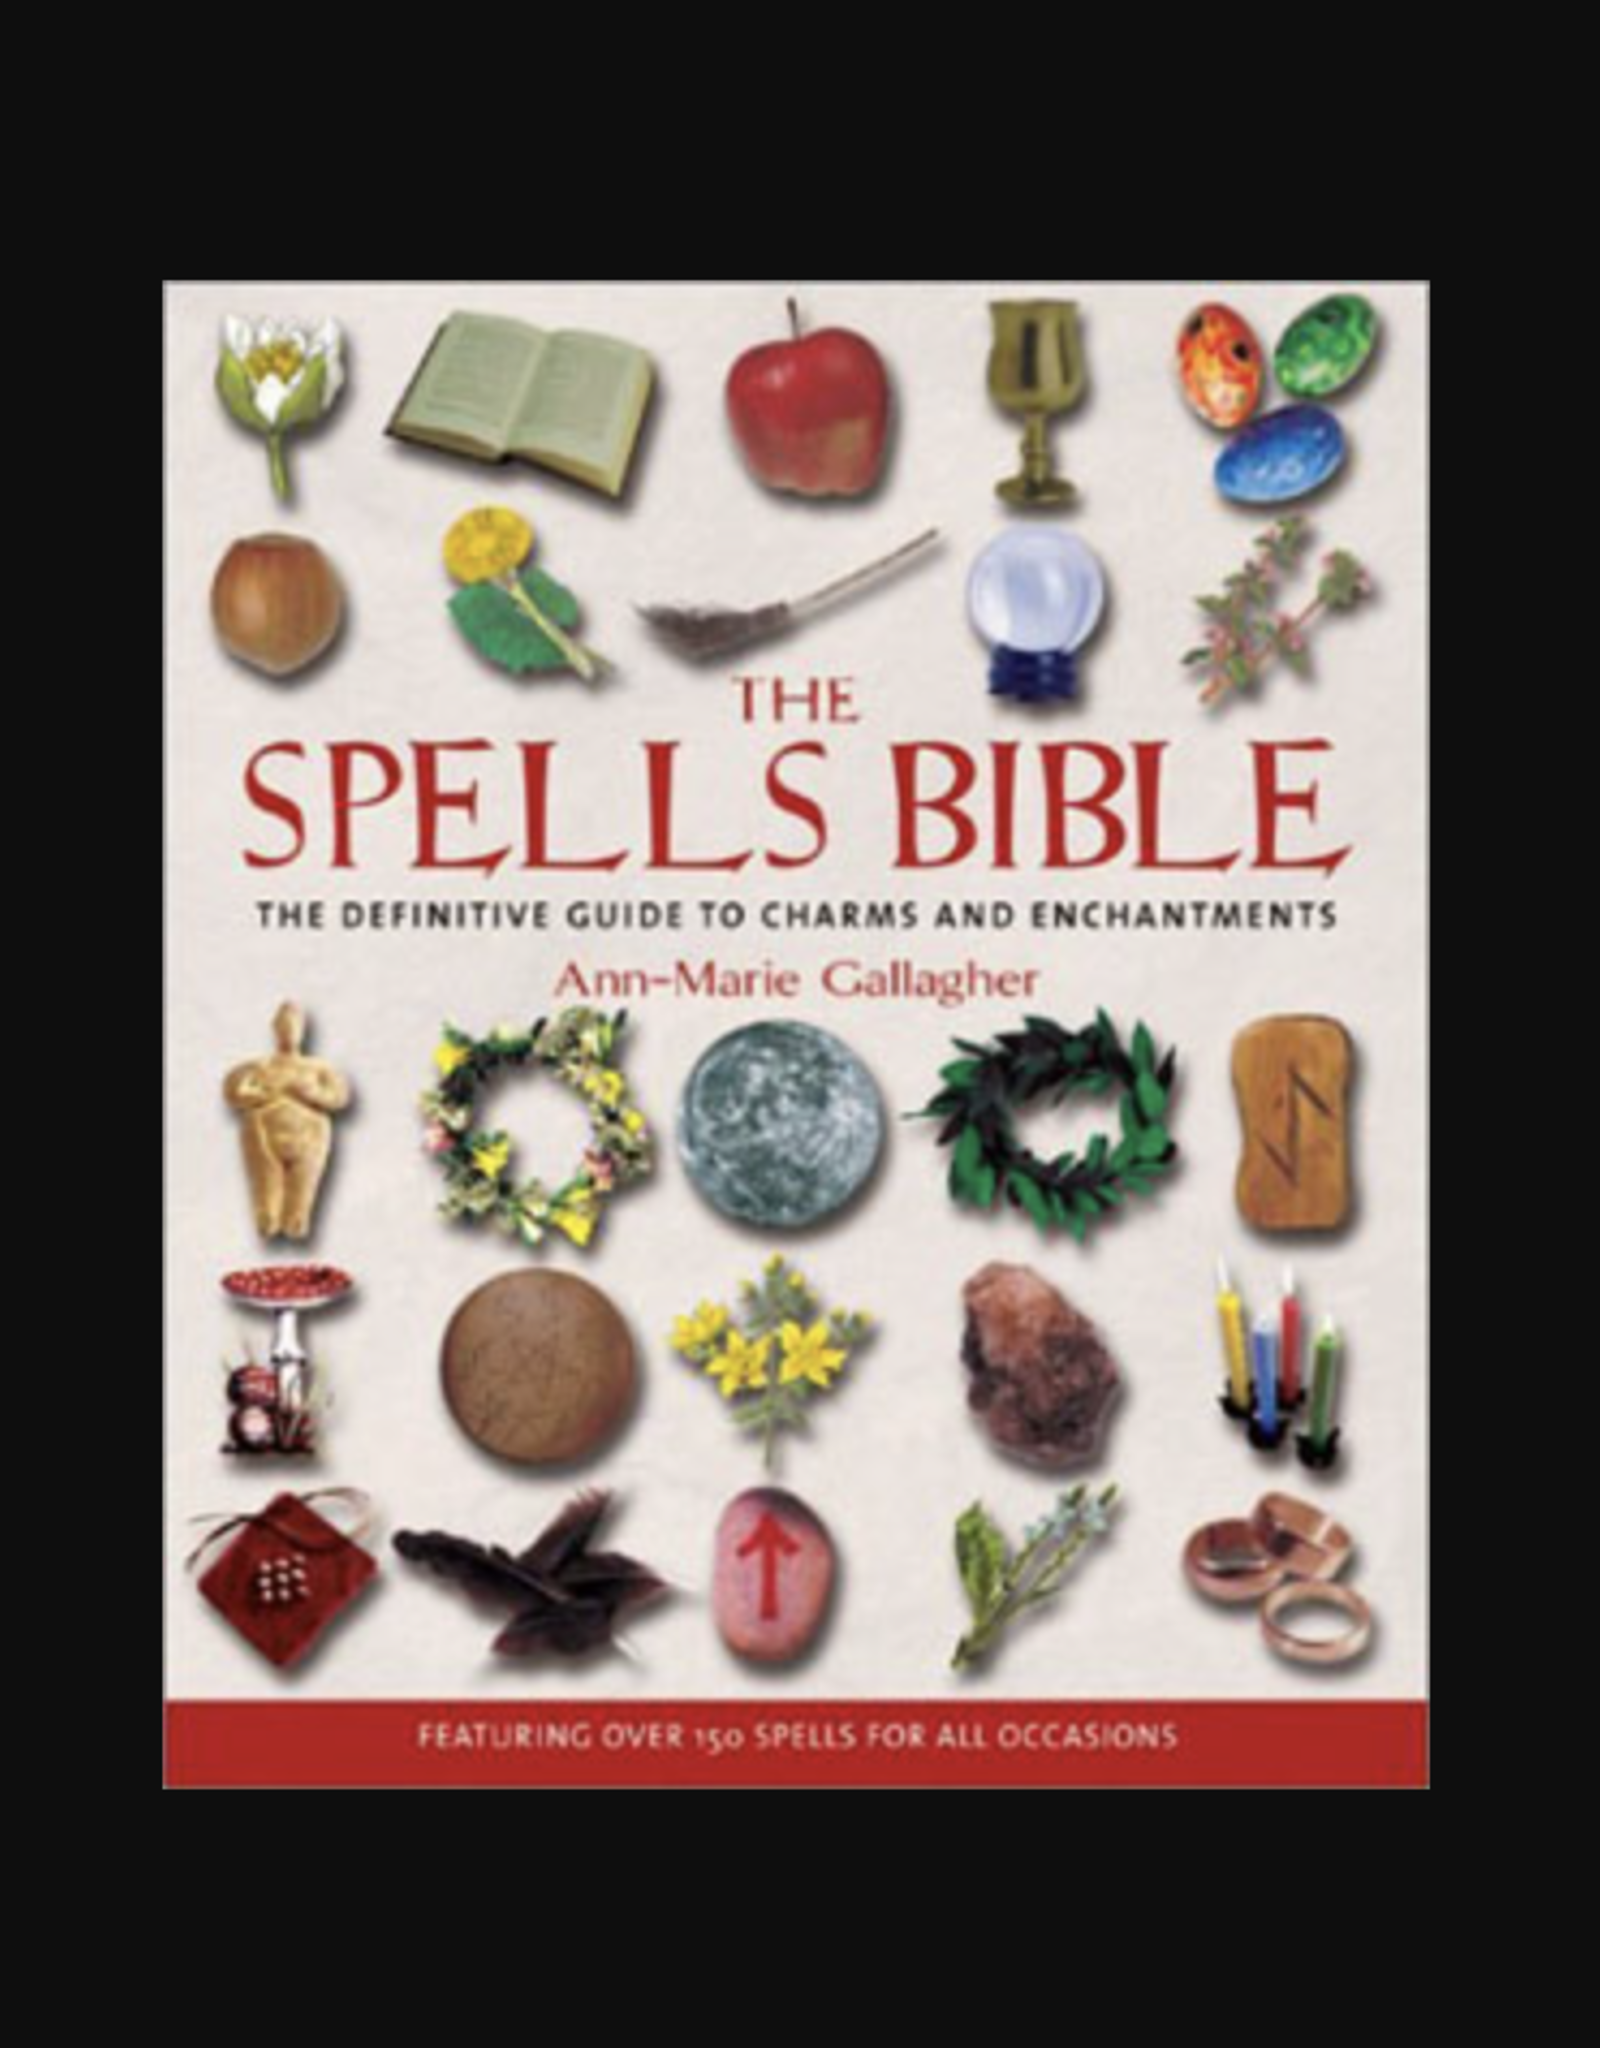 Spells Bible - The Definitive Guide to Charms and Enchantments